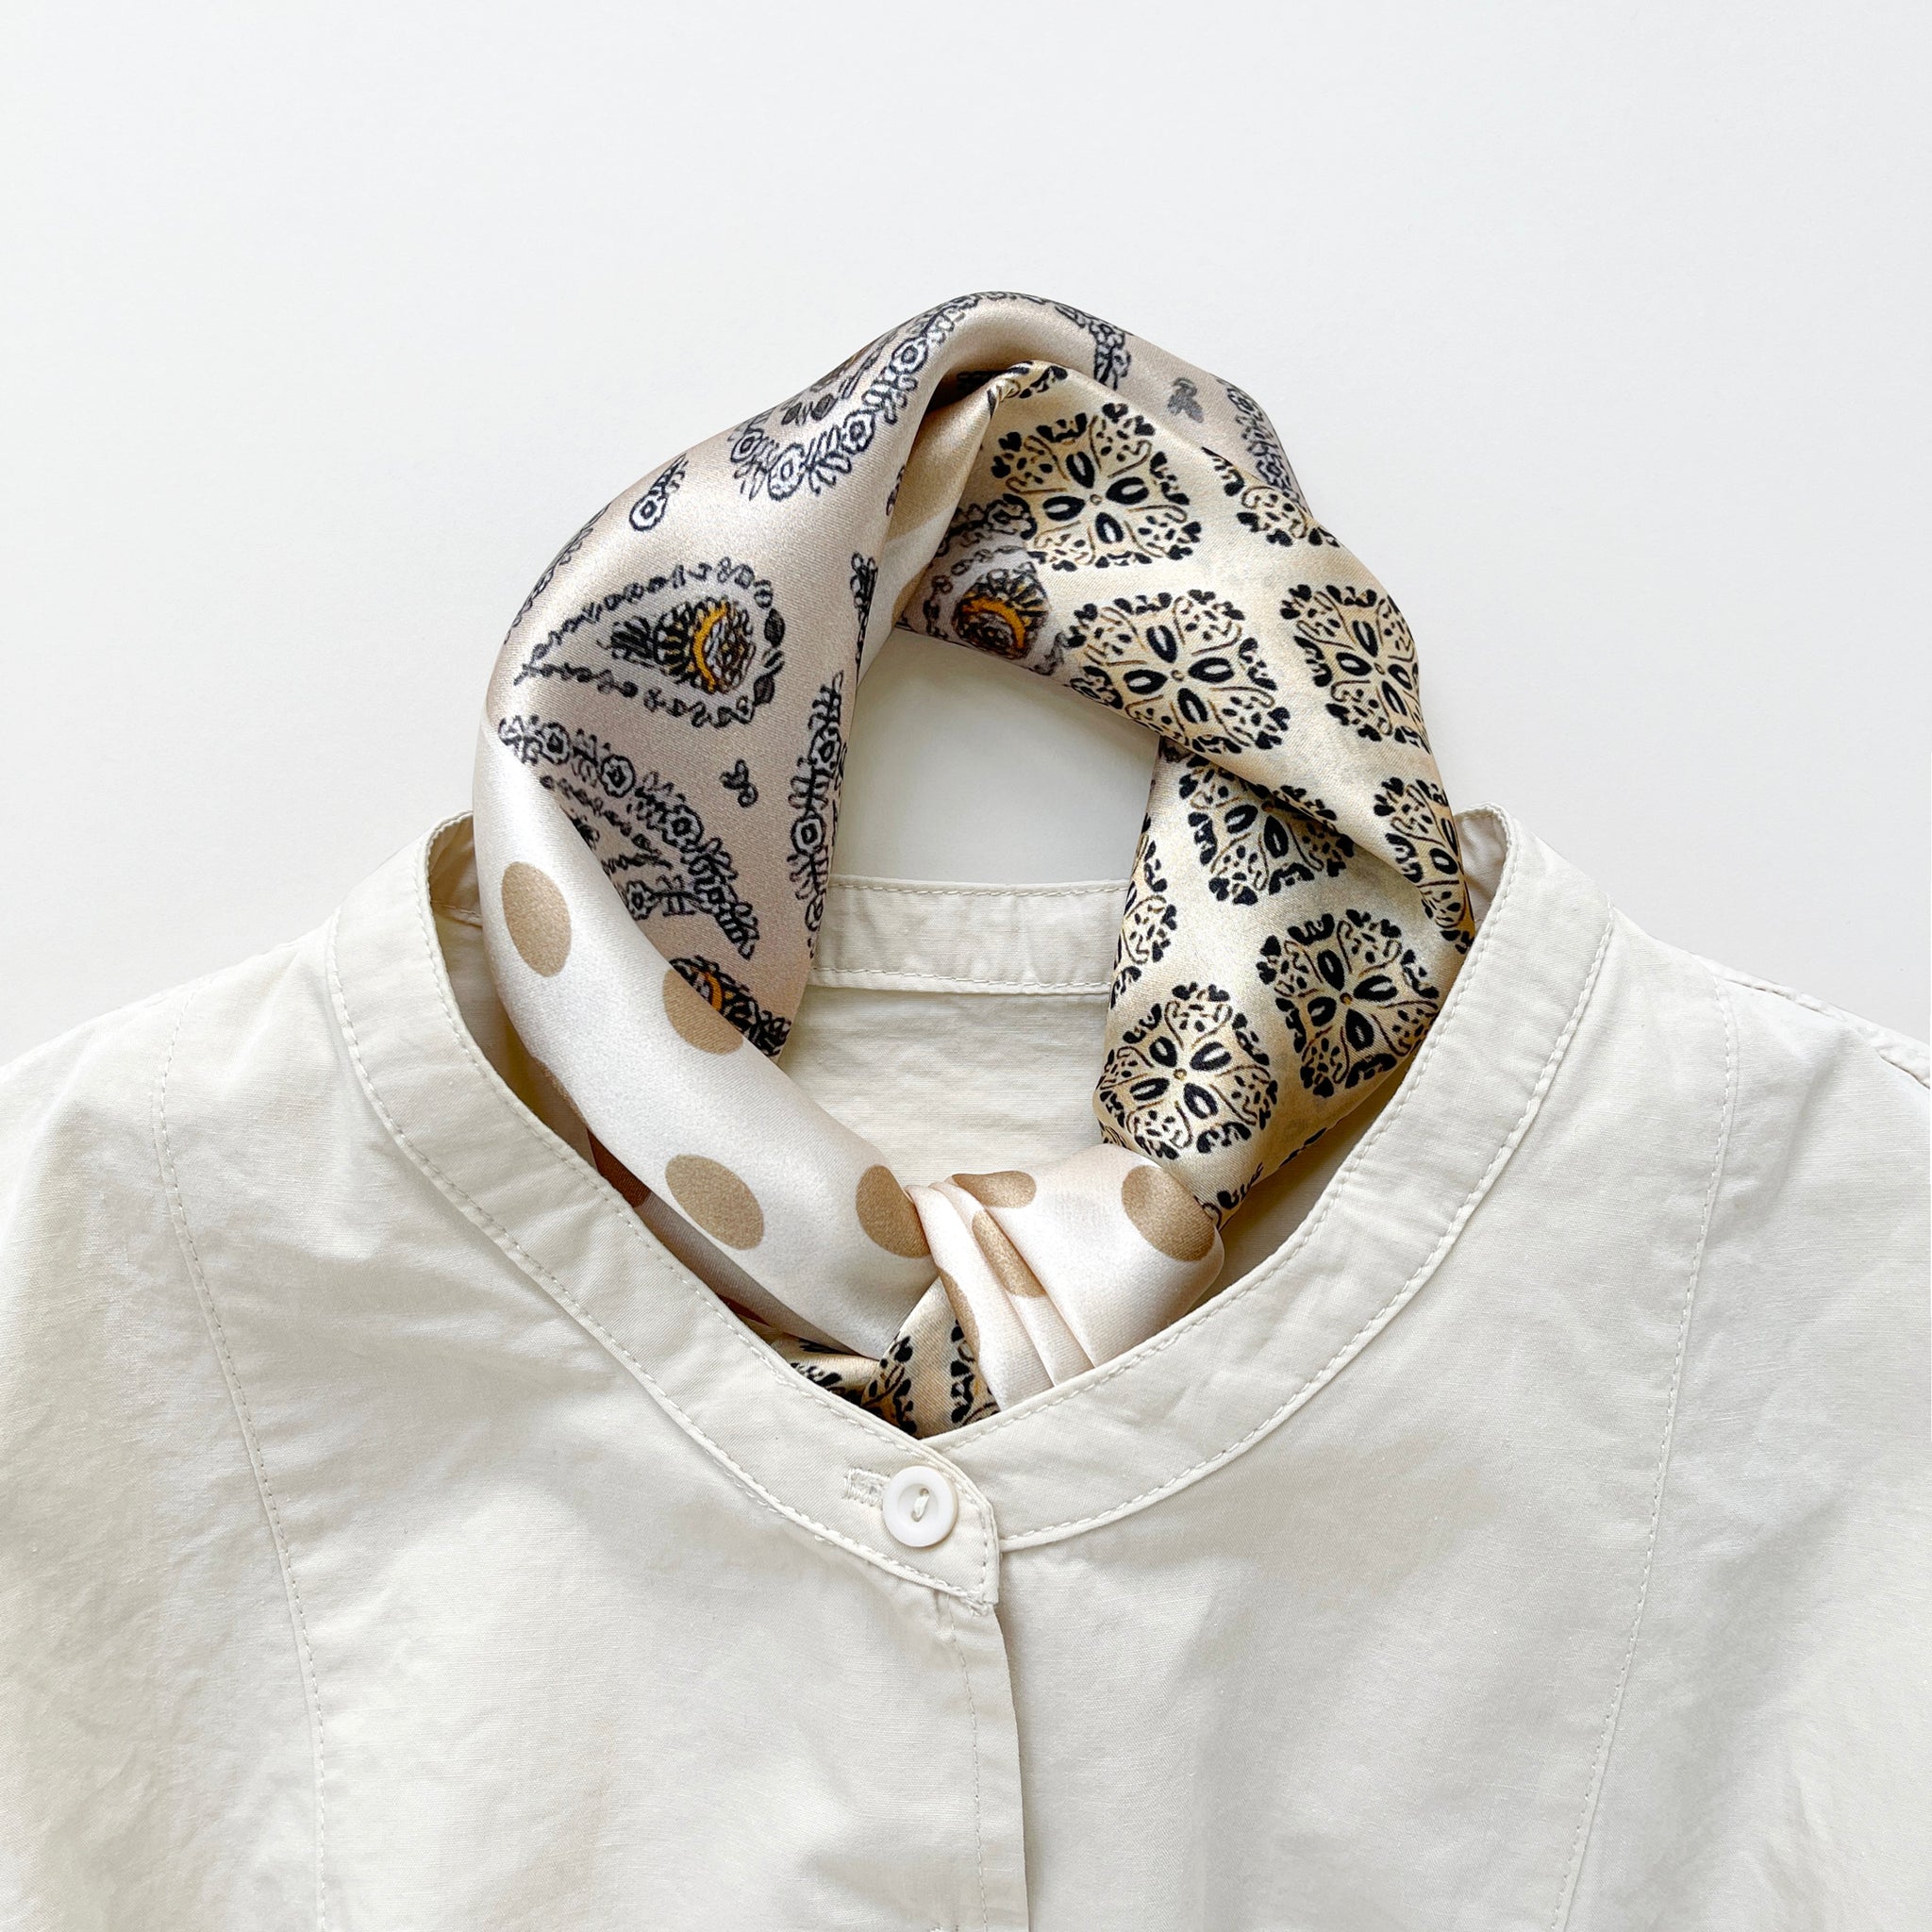 a beige and brown earth tones silk scarf featuring bohemian paisley and polka dot prints with brown edges, knotted as neck scarf, paired with a beige women's turtle neck shirt